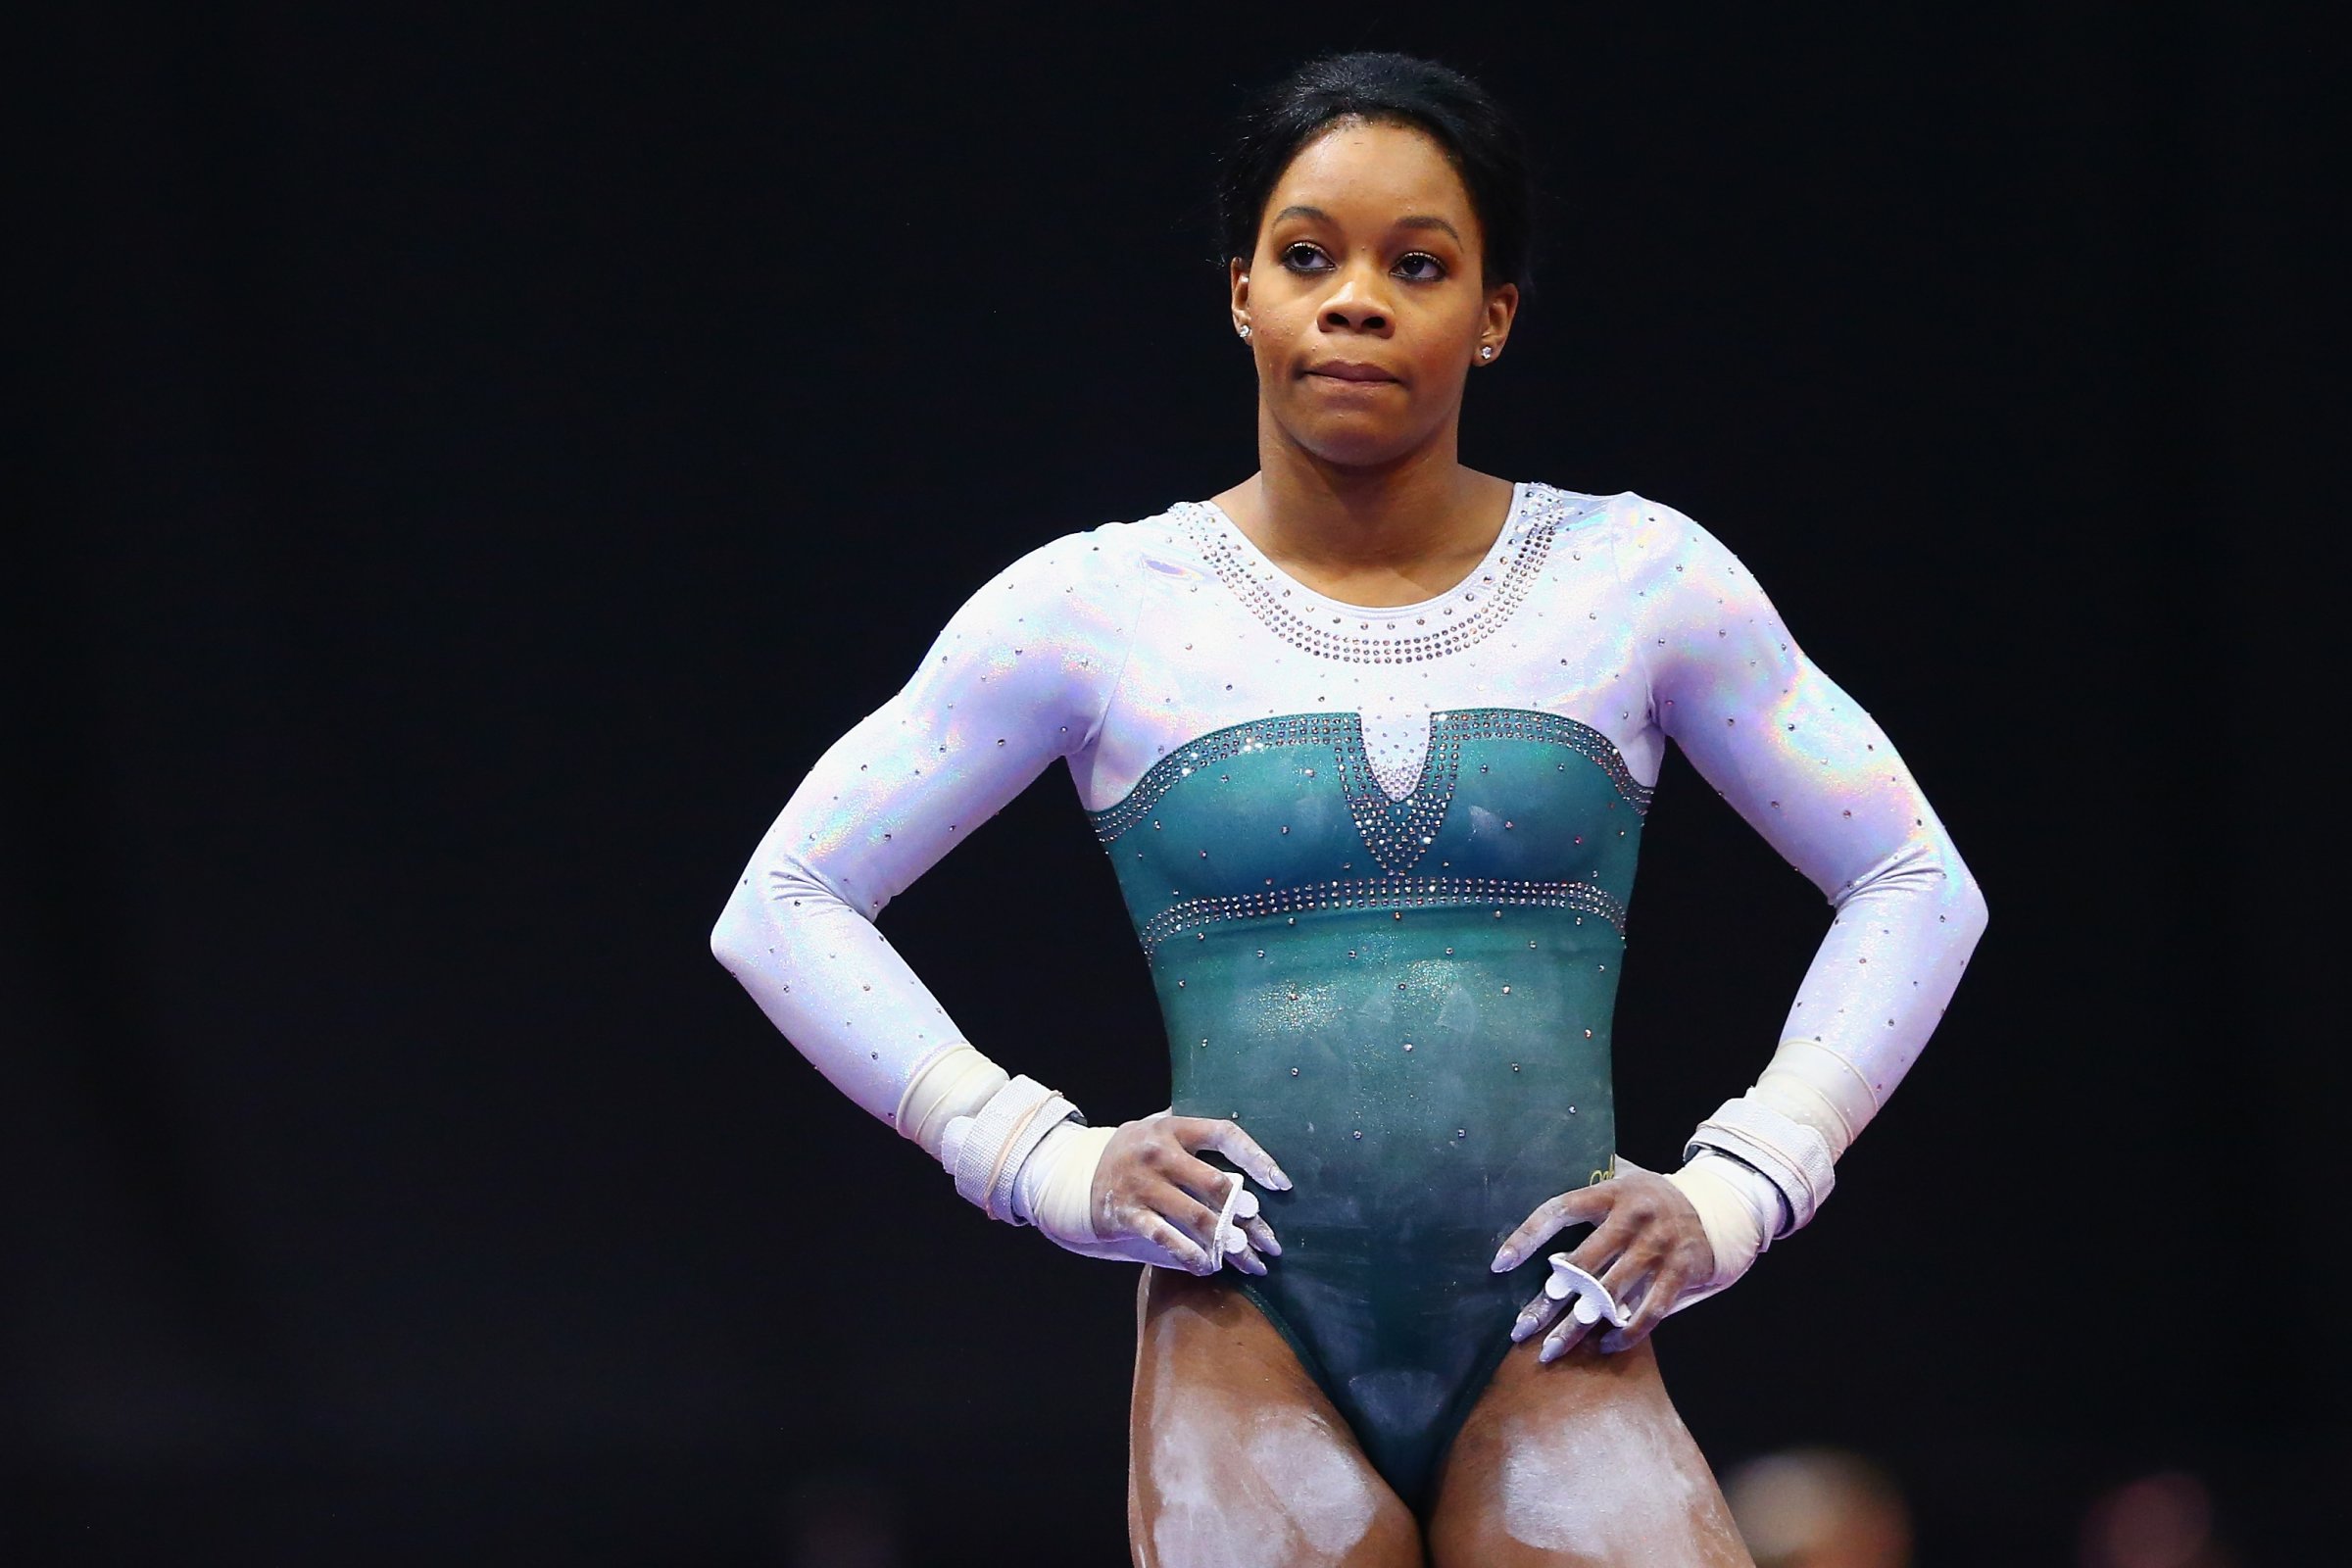 Gabrielle Douglas looks on during warm ups before the Sr. Women's 2016 Secret U.S. Classic at the XL Center on June 4, 2016 in Hartford, Connecticut.